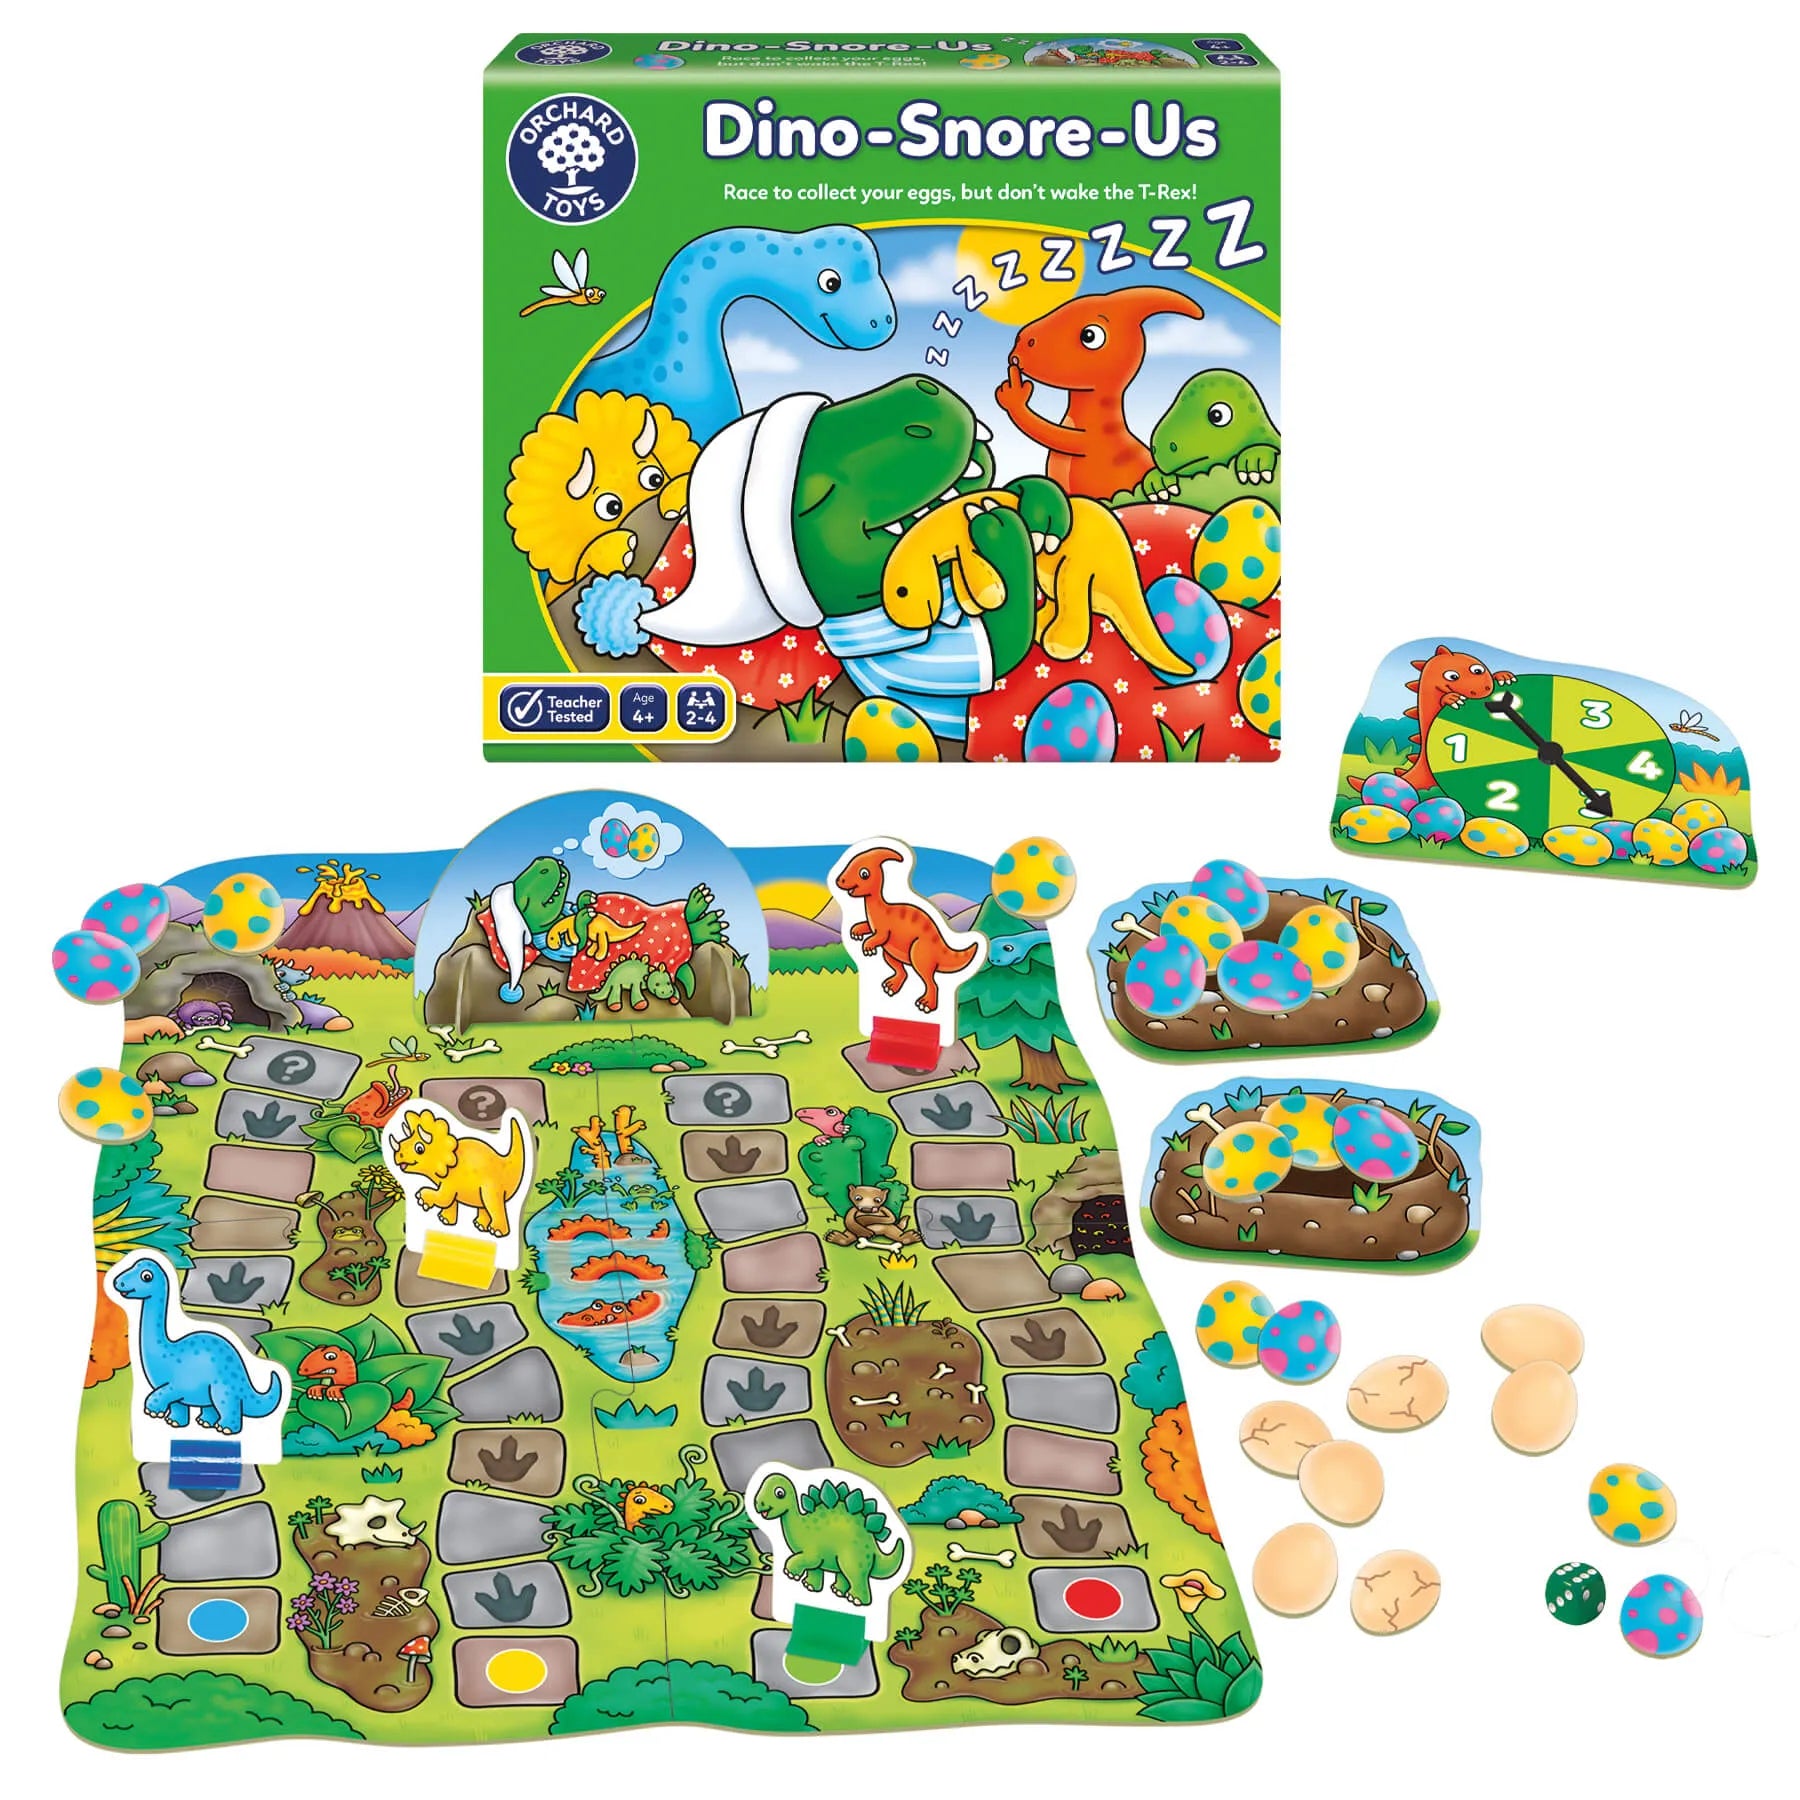 Products and Contents - Dino Snore Us